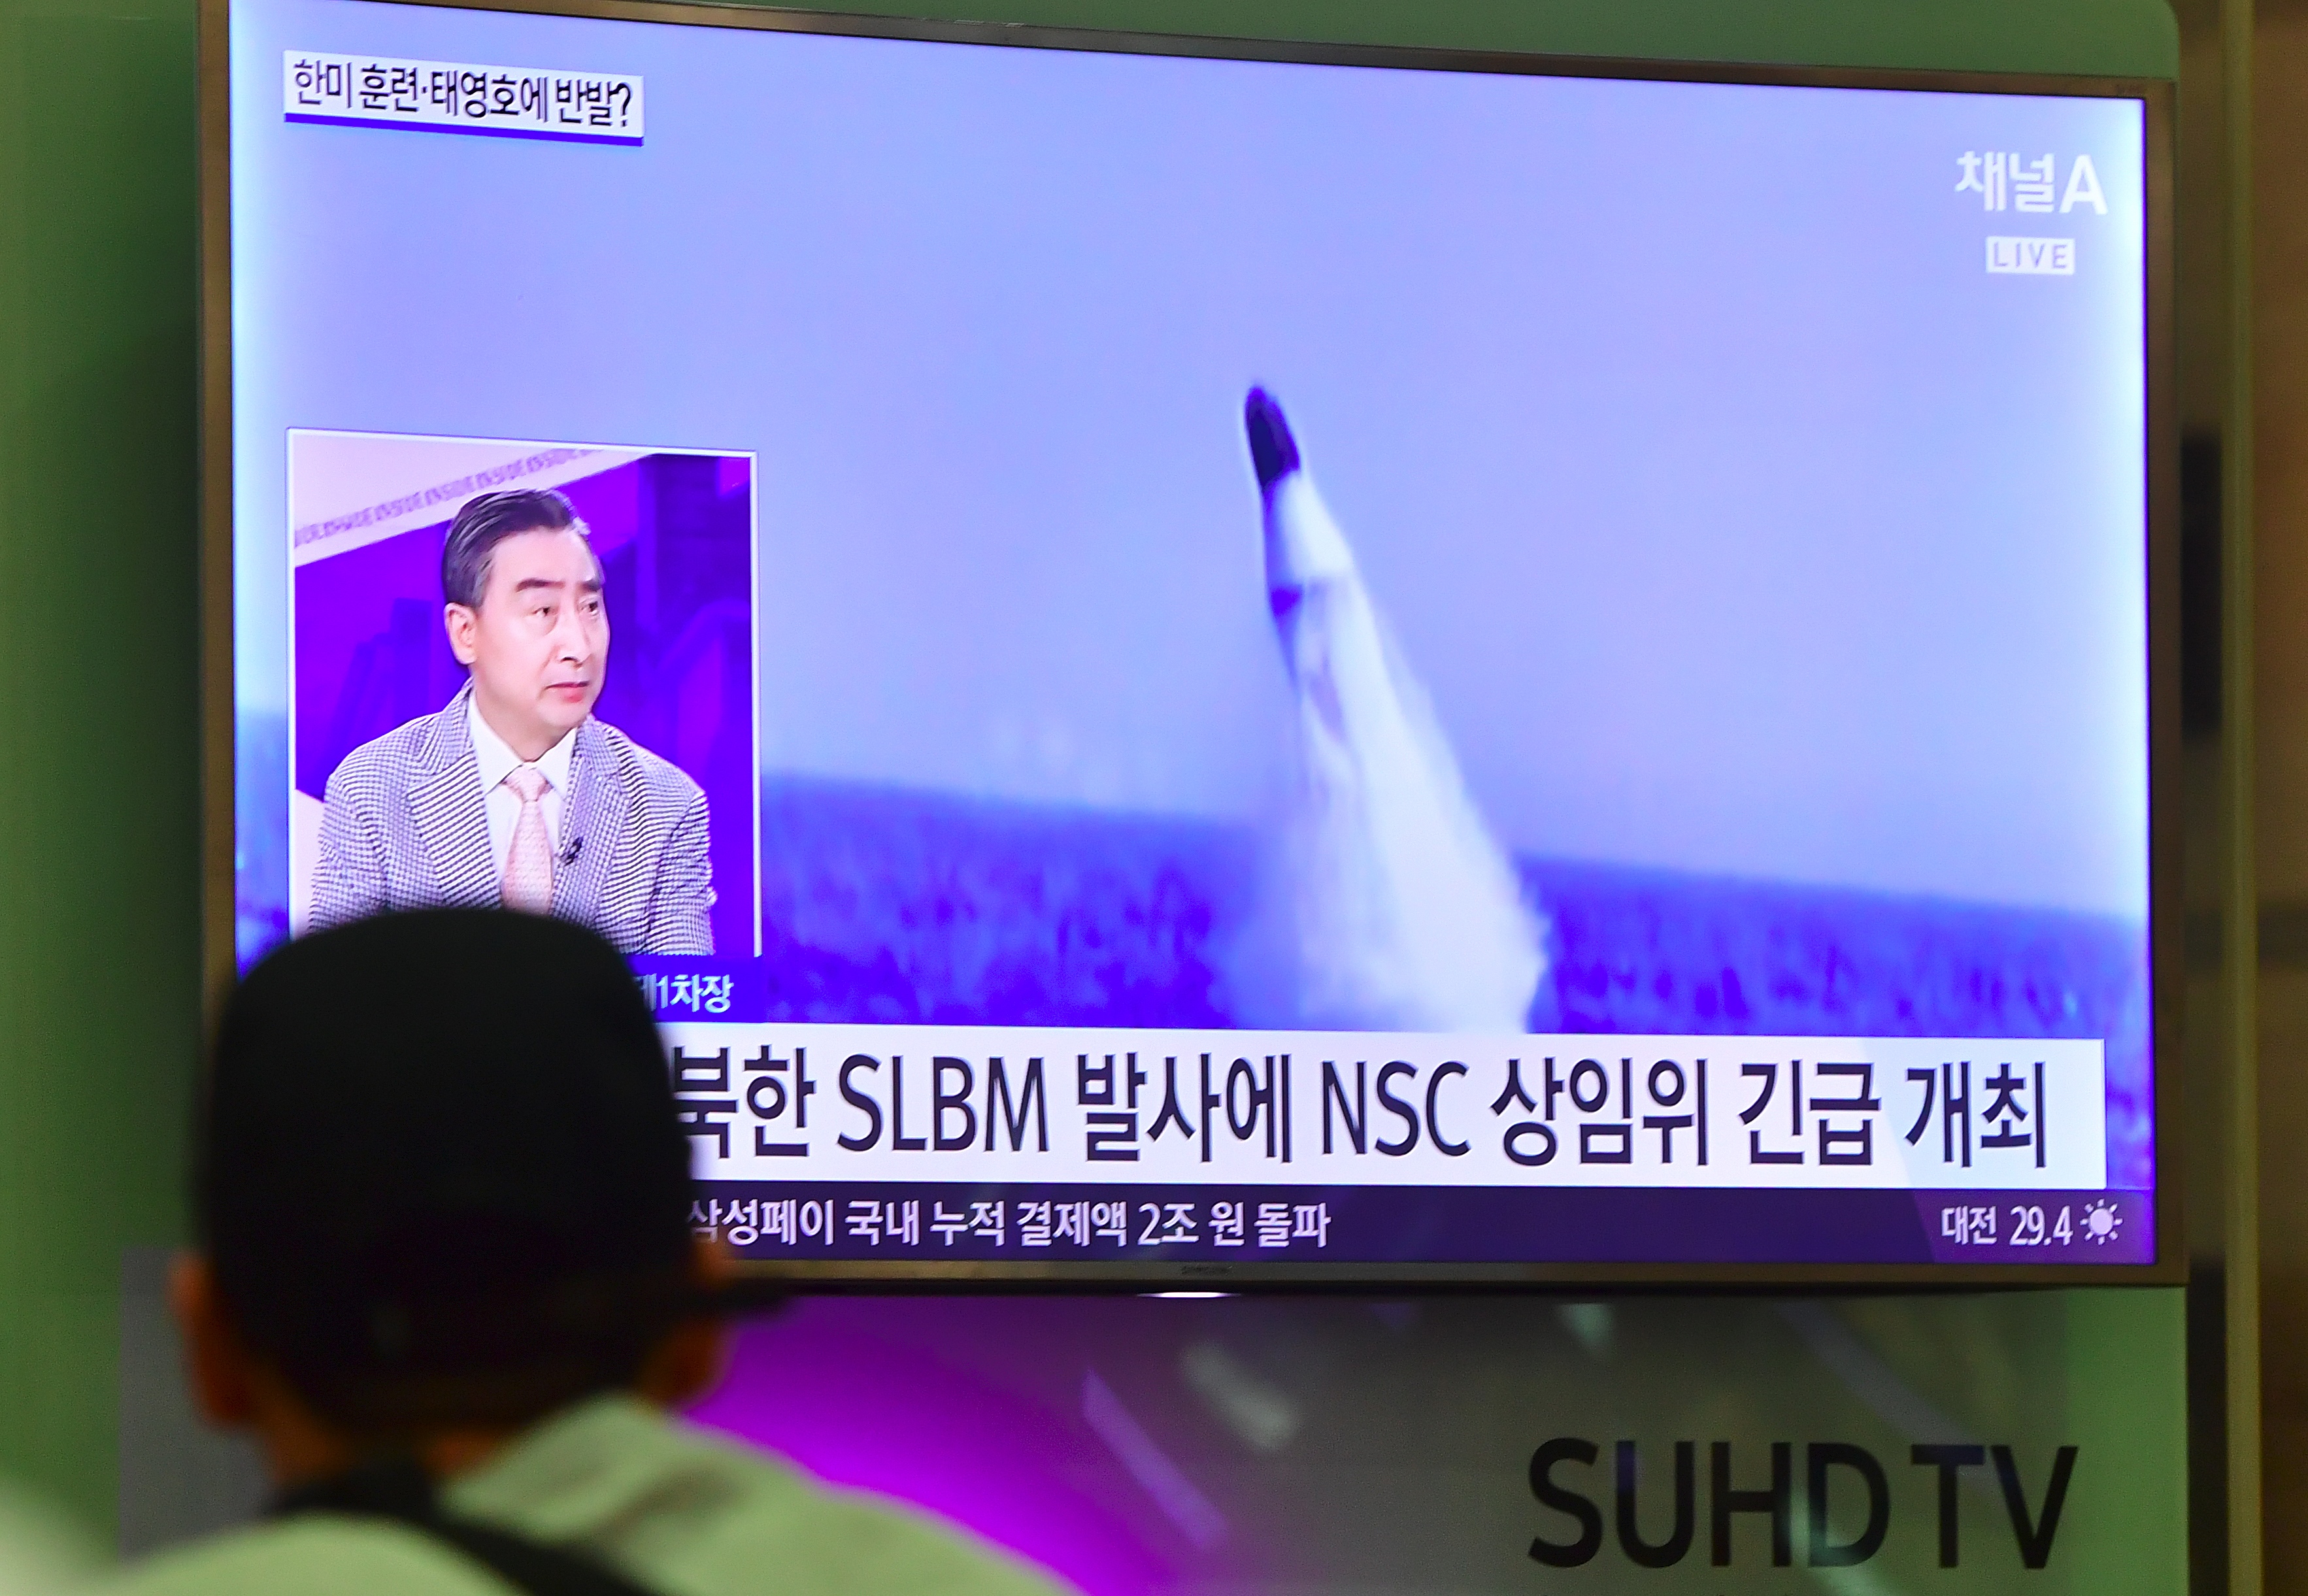 A man watches a television news showing file footage of a North Korean missile launch at Incheon airport, west of Seoul, on August 24, 2016. North Korea test-fired a submarinelaunched ballistic missile on August 24, days after threatening a nuclear strike in retaliation at the start of large-scale South Korea-US military exercises. / AFP PHOTO / JUNG YEON-JE